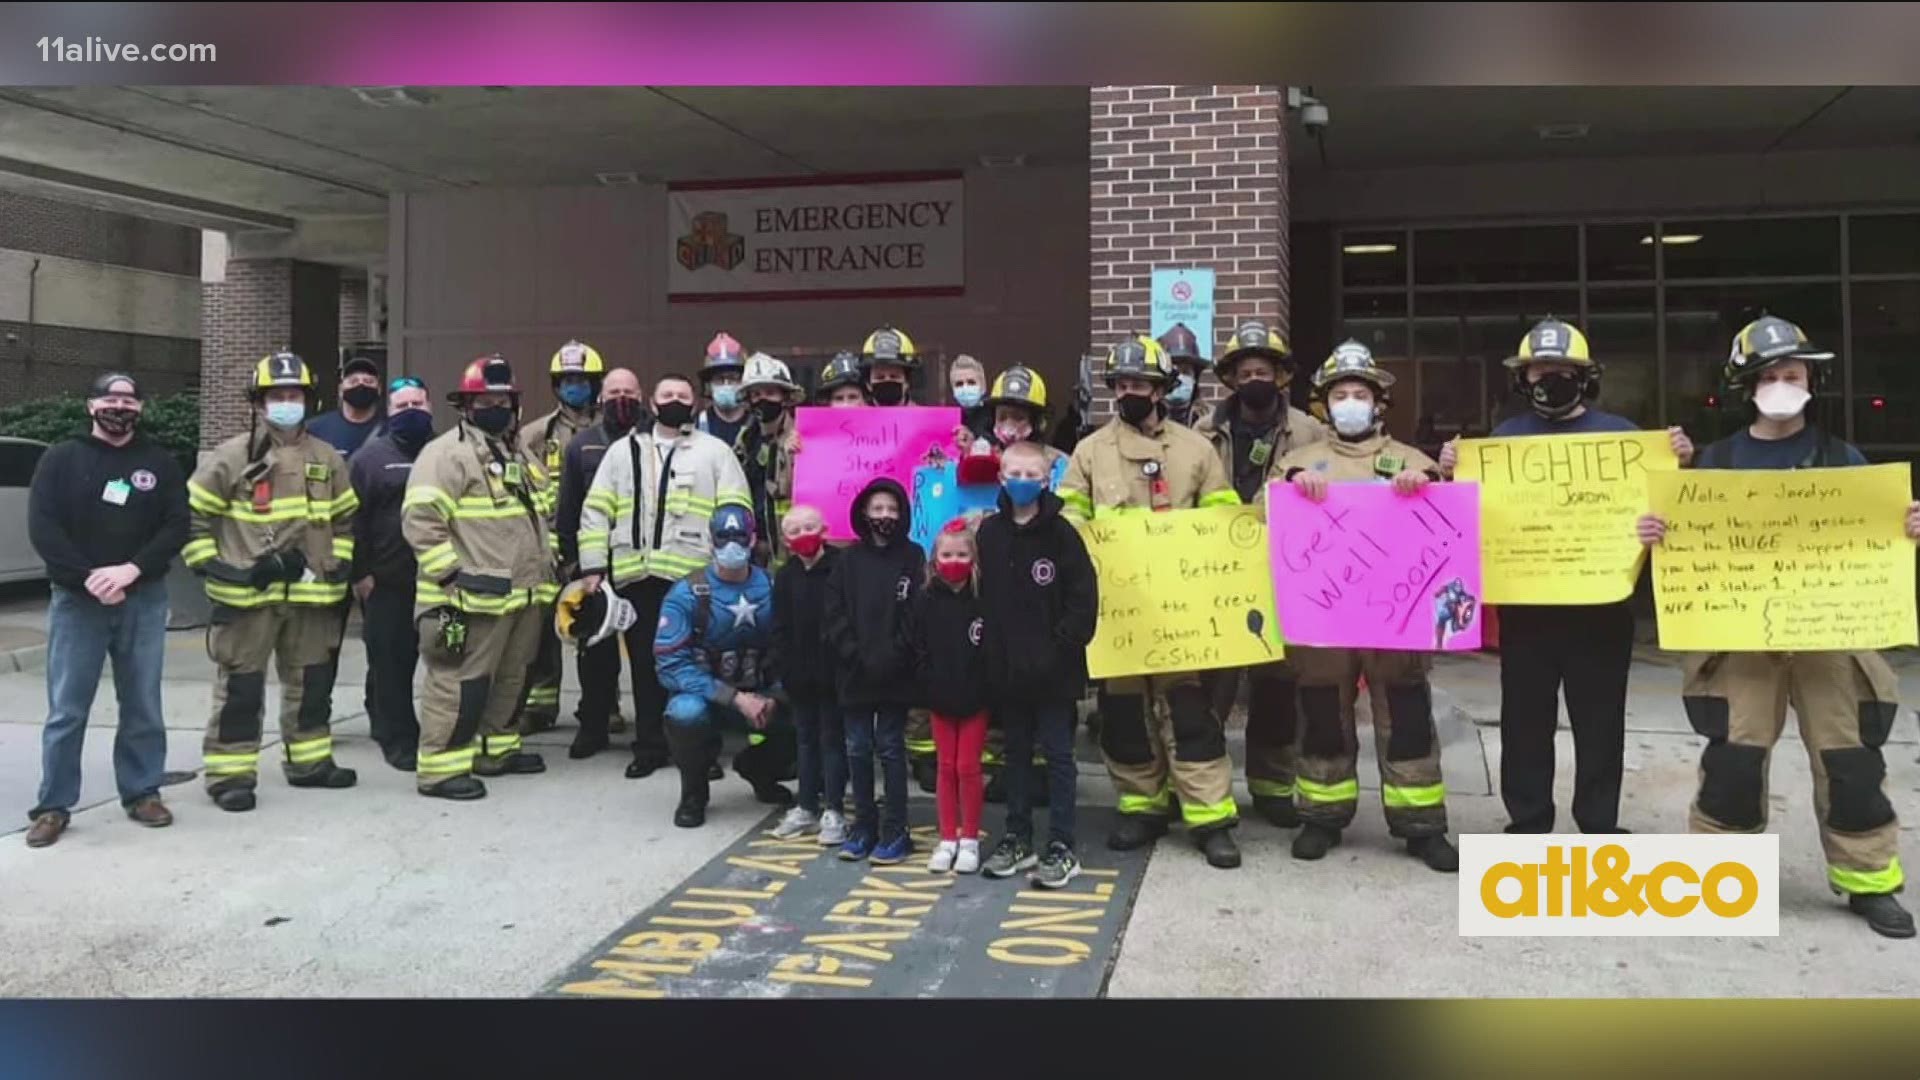 Firefighters and Captain America raised their ladders to the 5th floor of the children's hospital and surprised 4-year-old Nolan Turner, who's battling lymphoma.